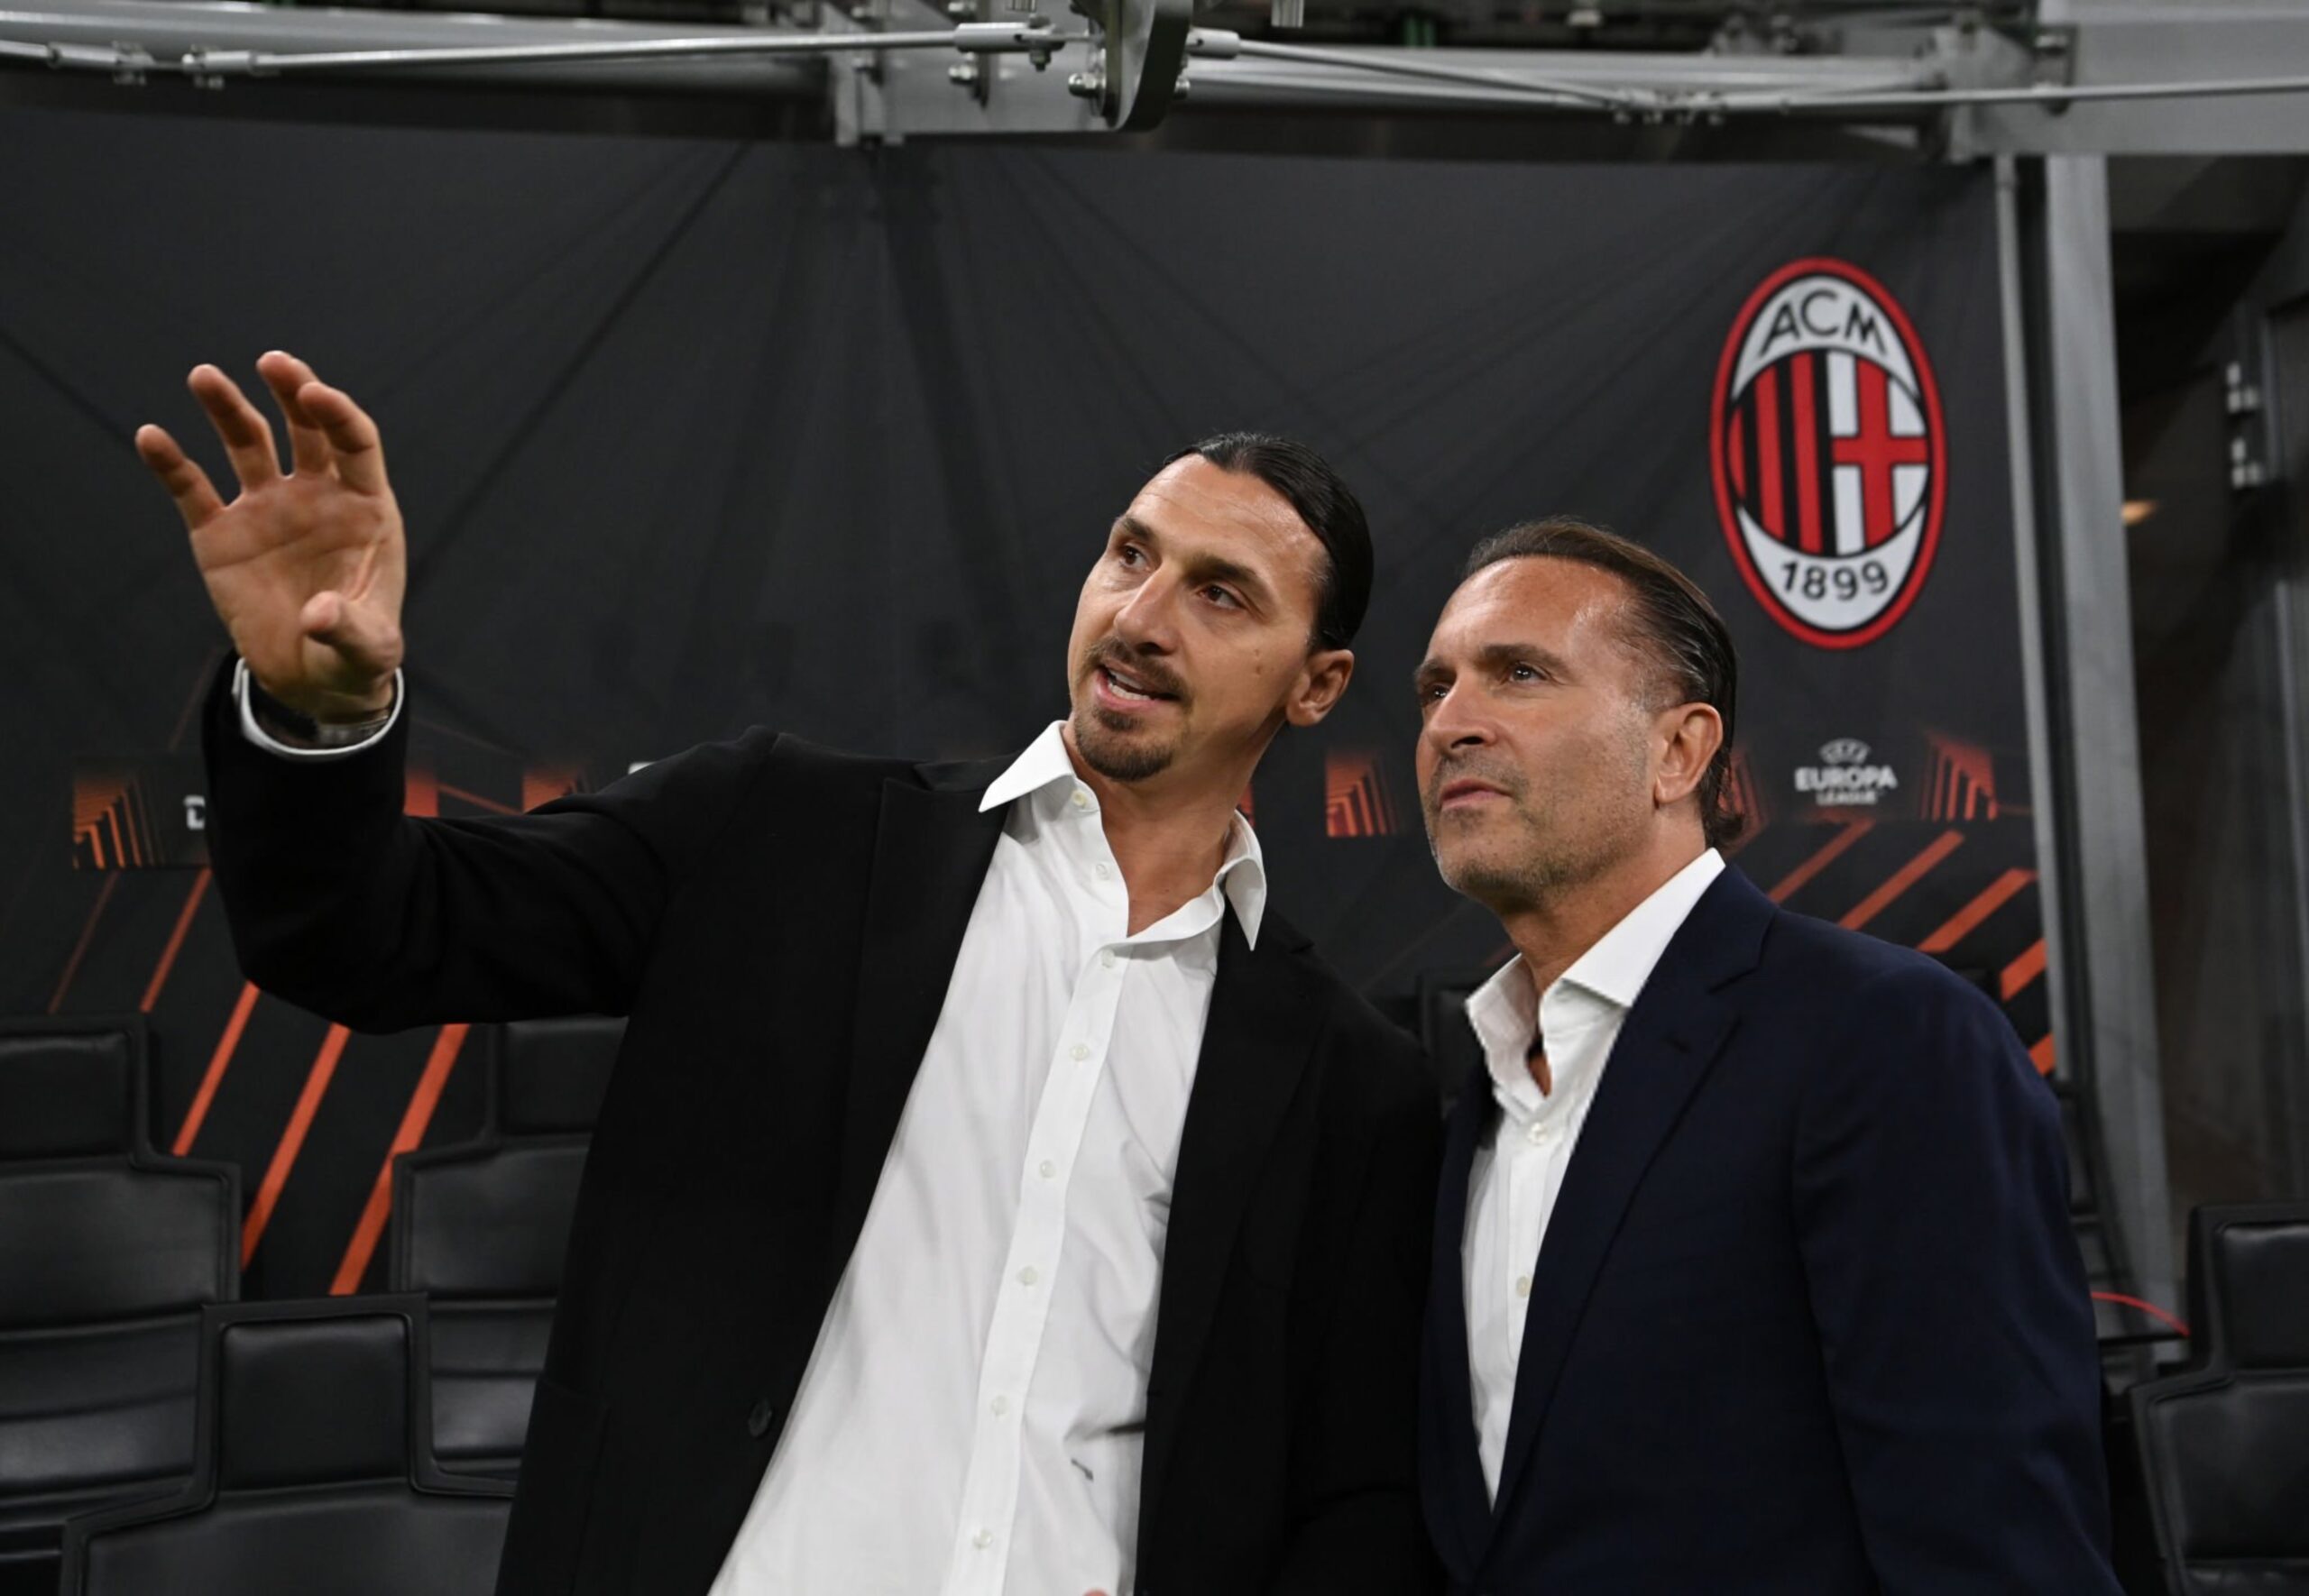 Sky: "Fonseca and Conceicao are the hottest names for the Milan bench"